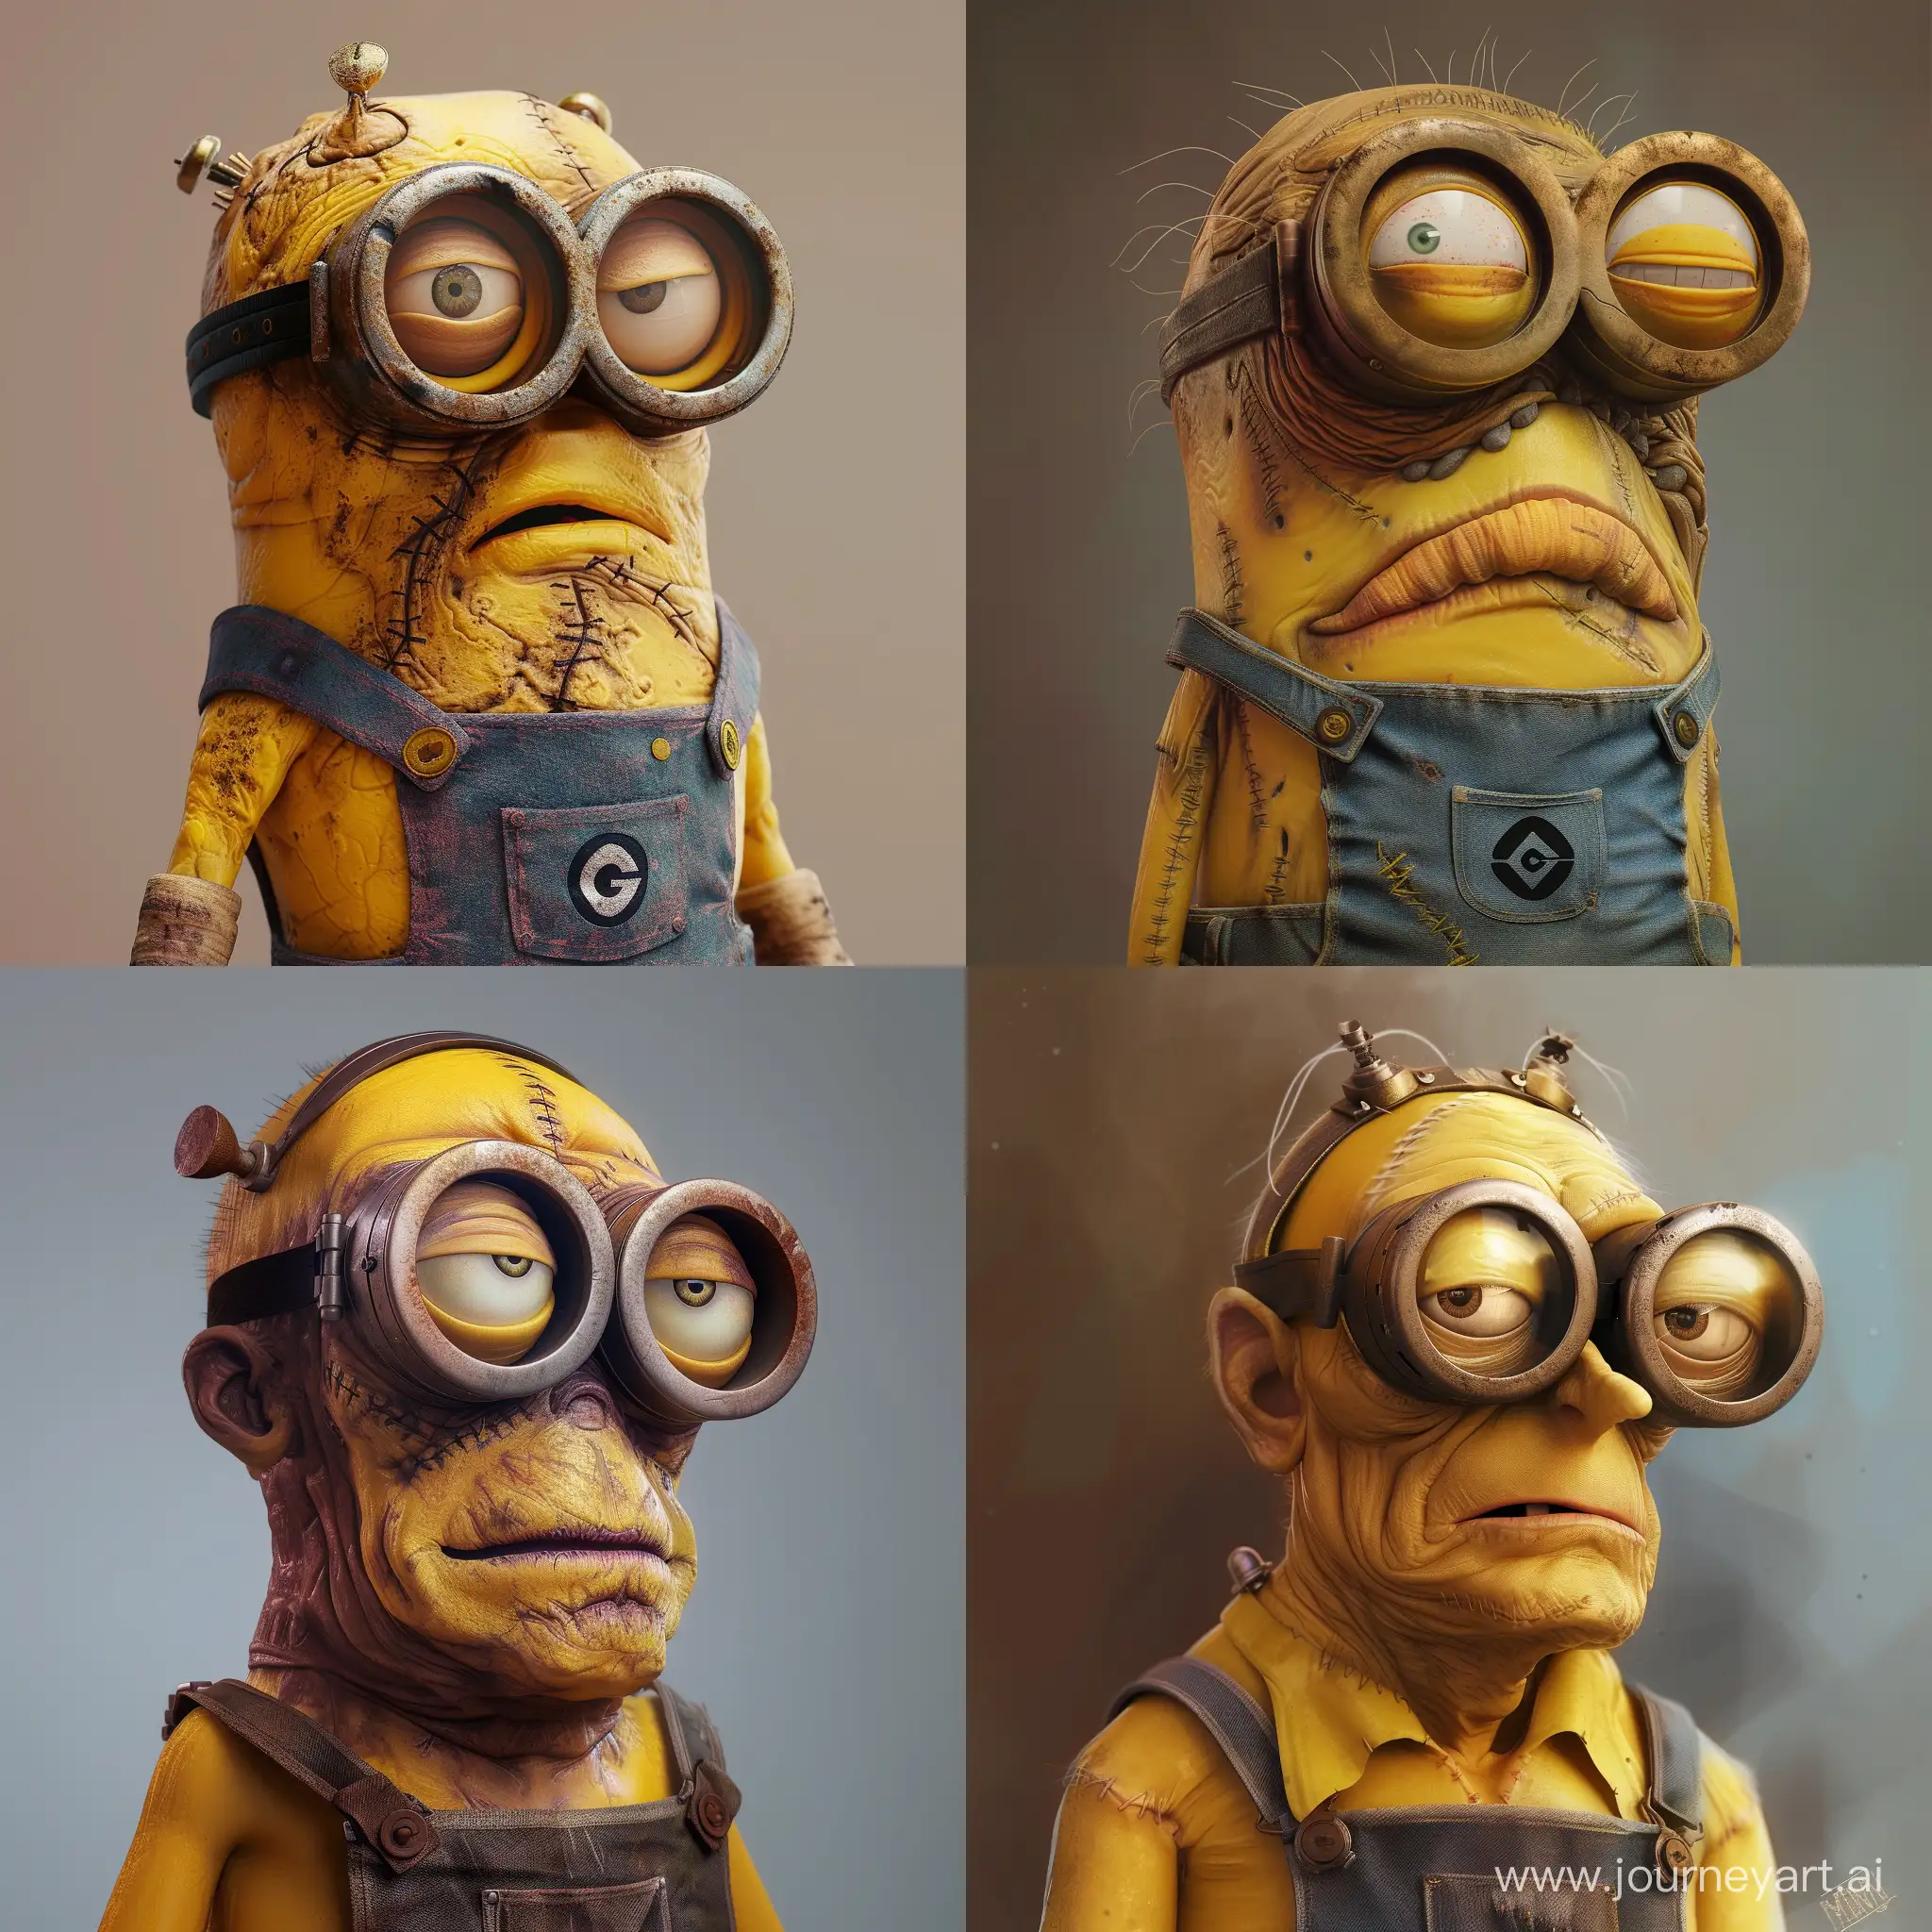 Create a photorealistic depiction of a Frankenstein-Minion hybrid from the movie Minions. This character should embody the classic elements of Frankenstein's monster fused with the distinctive features of a Minion, including its yellow skin, goggles, and overalls. Ensure that the portrayal maintains the recognizable charm of both iconic characters while seamlessly integrating their visual traits into a cohesive and visually compelling composition.